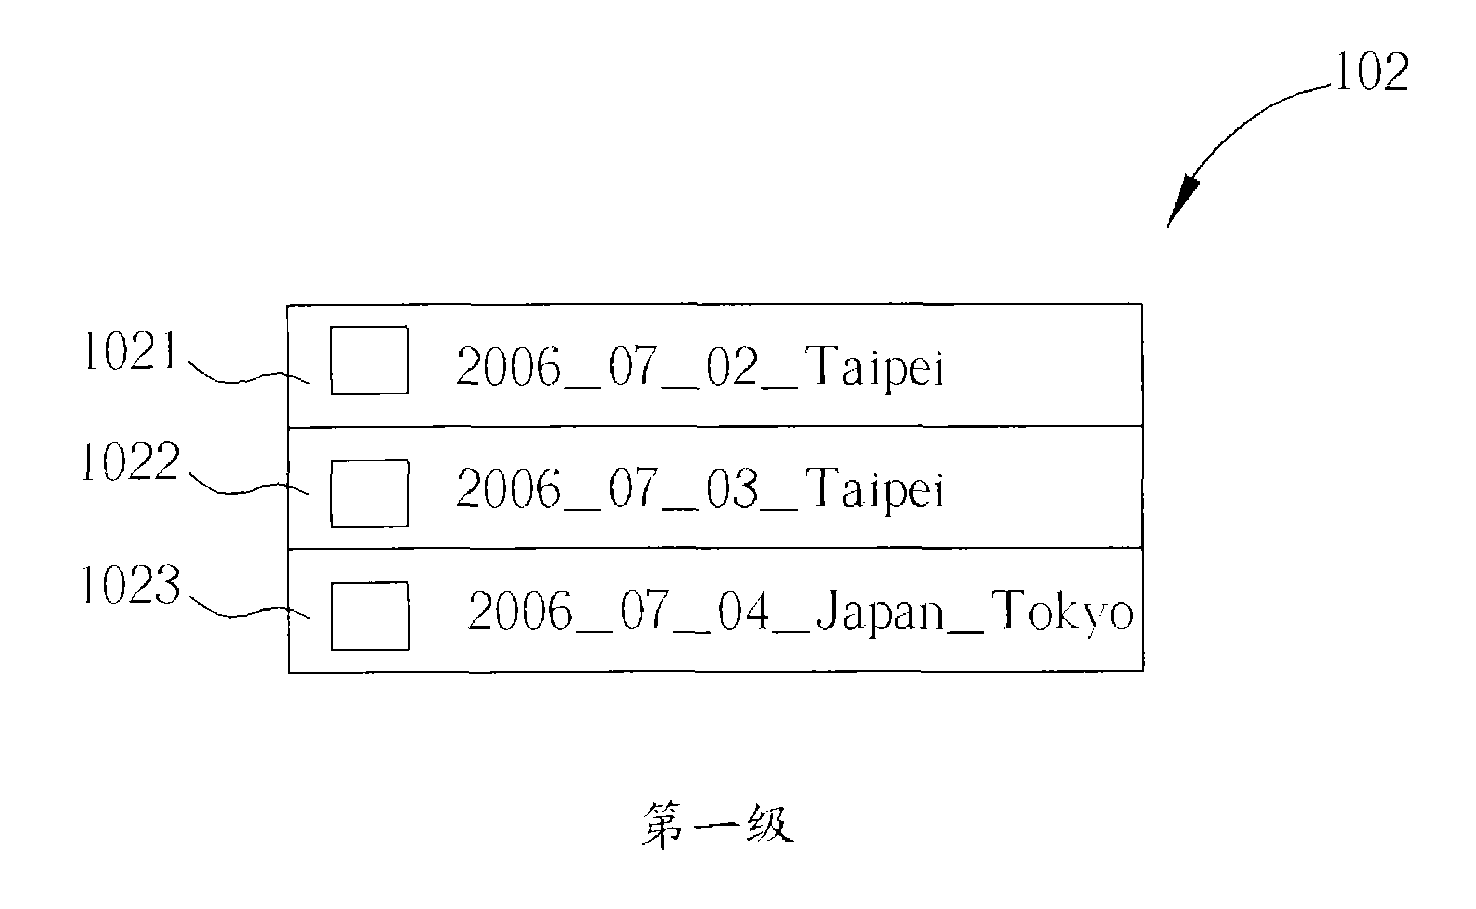 Methods and electronic devices for browsing, managing and storing multimedia file